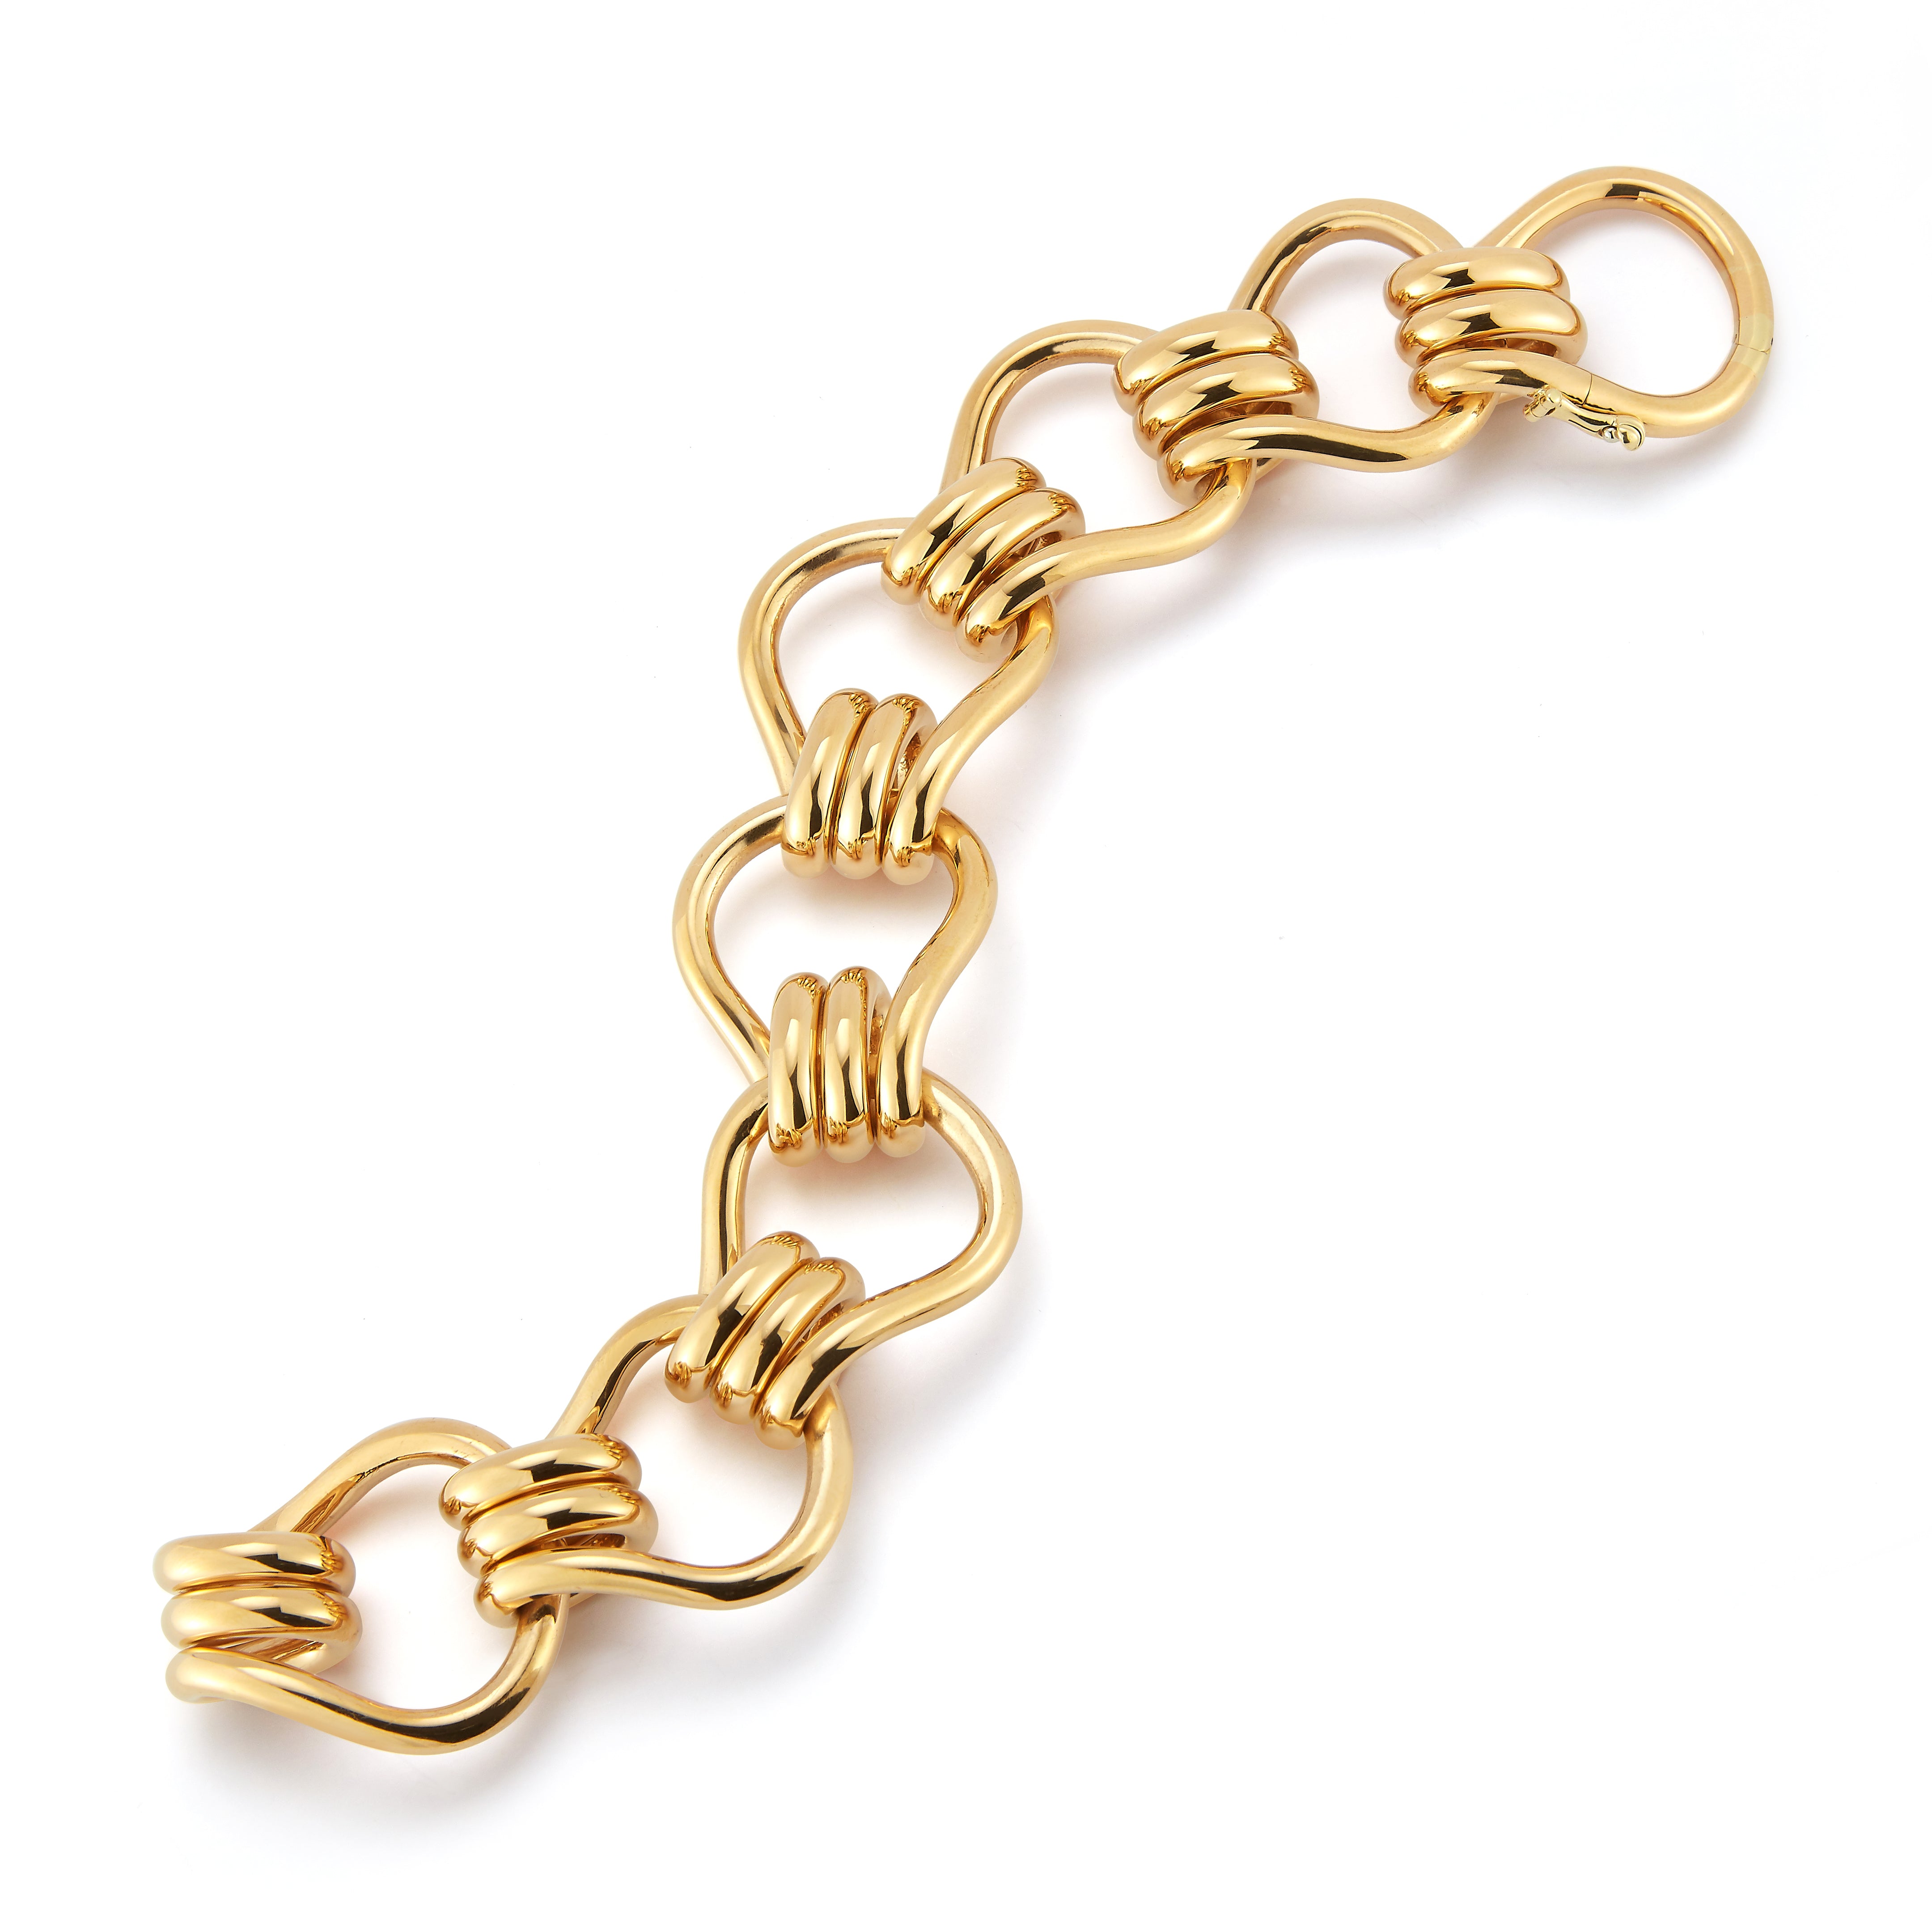 Mousetrap Bracelet in Yellow Gold